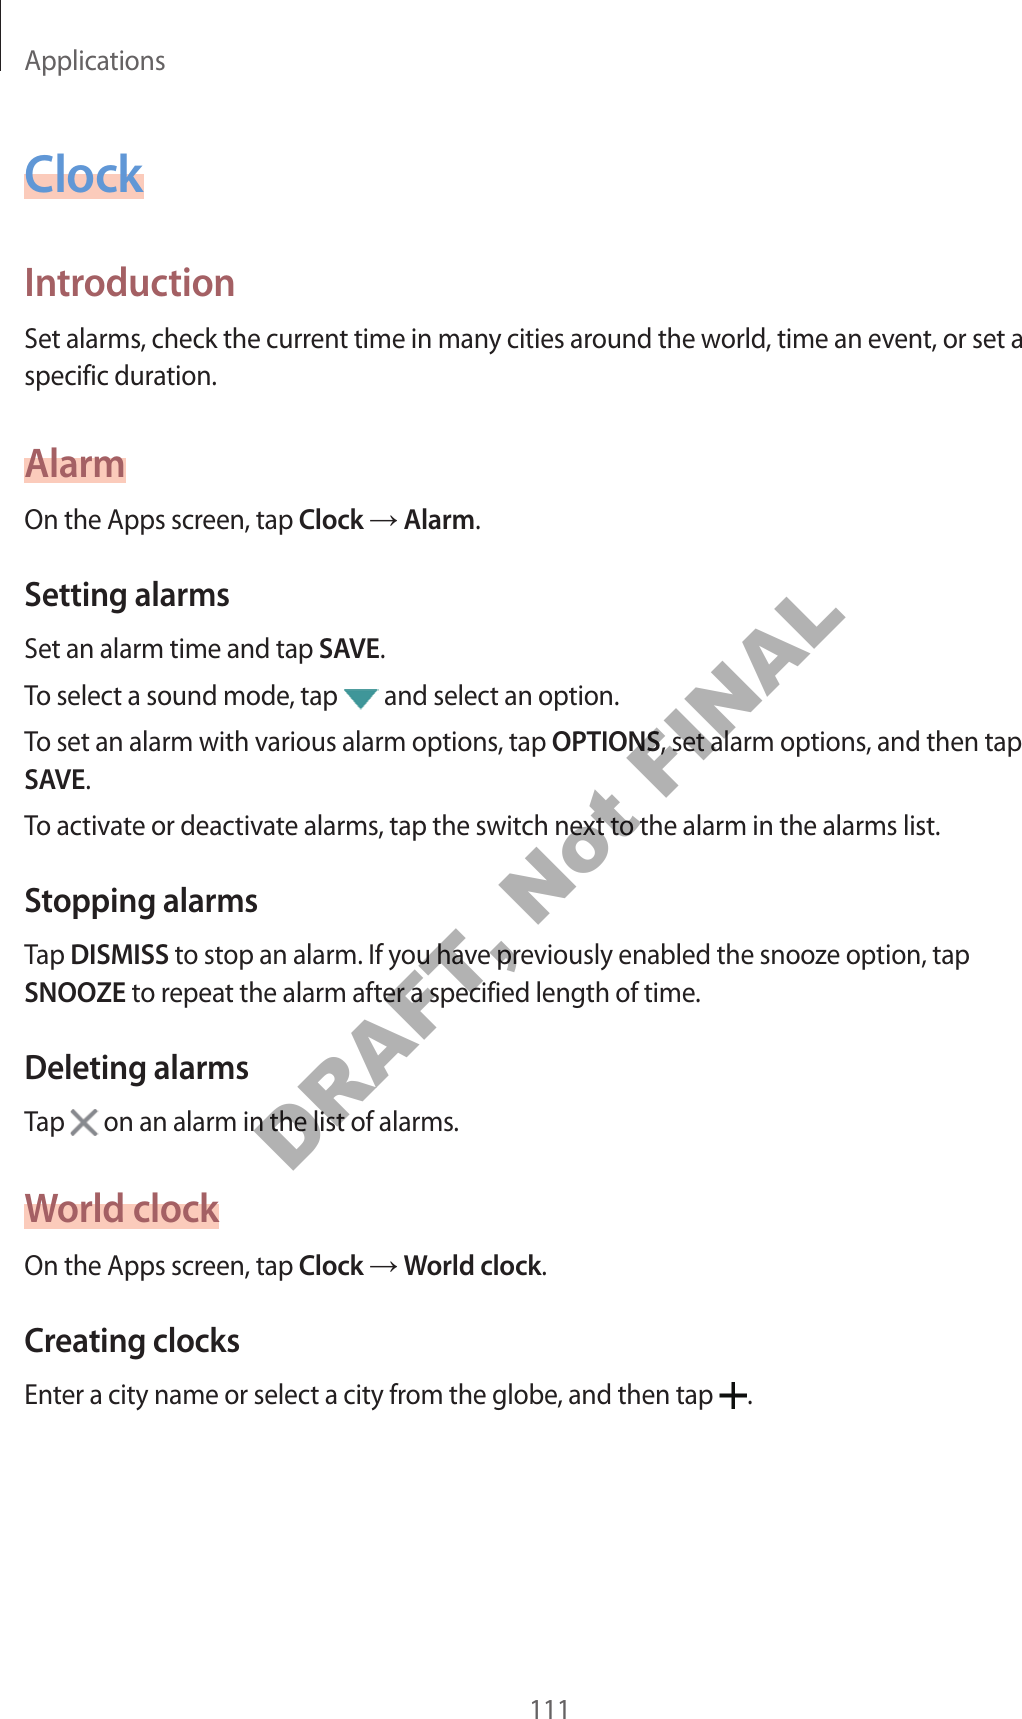 Applications111ClockIntroductionSet alarms, check the current time in many cities around the world, time an event, or set a specific duration.AlarmOn the Apps screen, tap Clock ĺ Alarm.Setting alarmsSet an alarm time and tap SAVE.To select a sound mode, tap   and select an option.To set an alarm with various alarm options, tap OPTIONS, set alarm options, and then tap SAVE.To activate or deactivate alarms, tap the switch next to the alarm in the alarms list.Stopping alarmsTap DISMISS to stop an alarm. If you have previously enabled the snooze option, tap SNOOZE to repeat the alarm after a specified length of time.Deleting alarmsTap   on an alarm in the list of alarms.World clockOn the Apps screen, tap Clock ĺ World clock.Creating clocksEnter a city name or select a city from the globe, and then tap  .DRAFT, Not FINAL